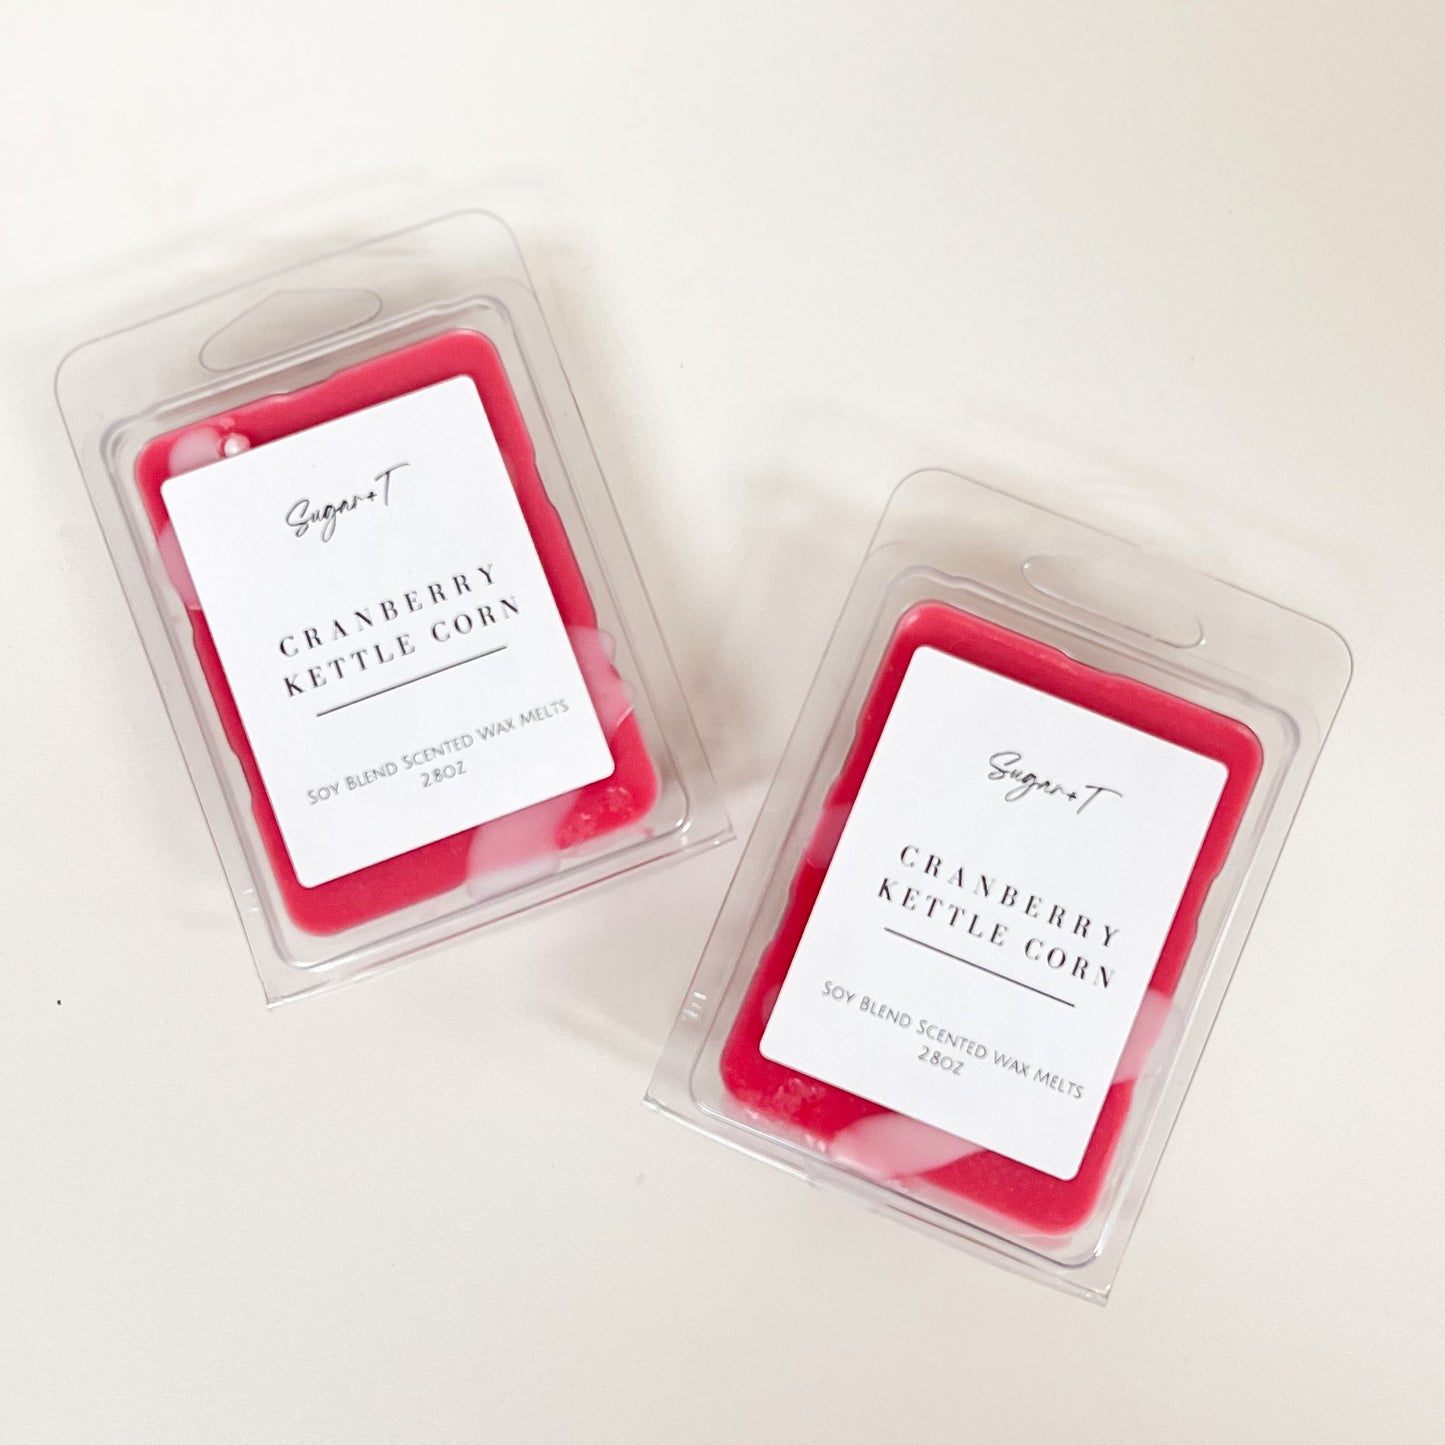 Cranberry Kettle Corn Scented Wax Melts